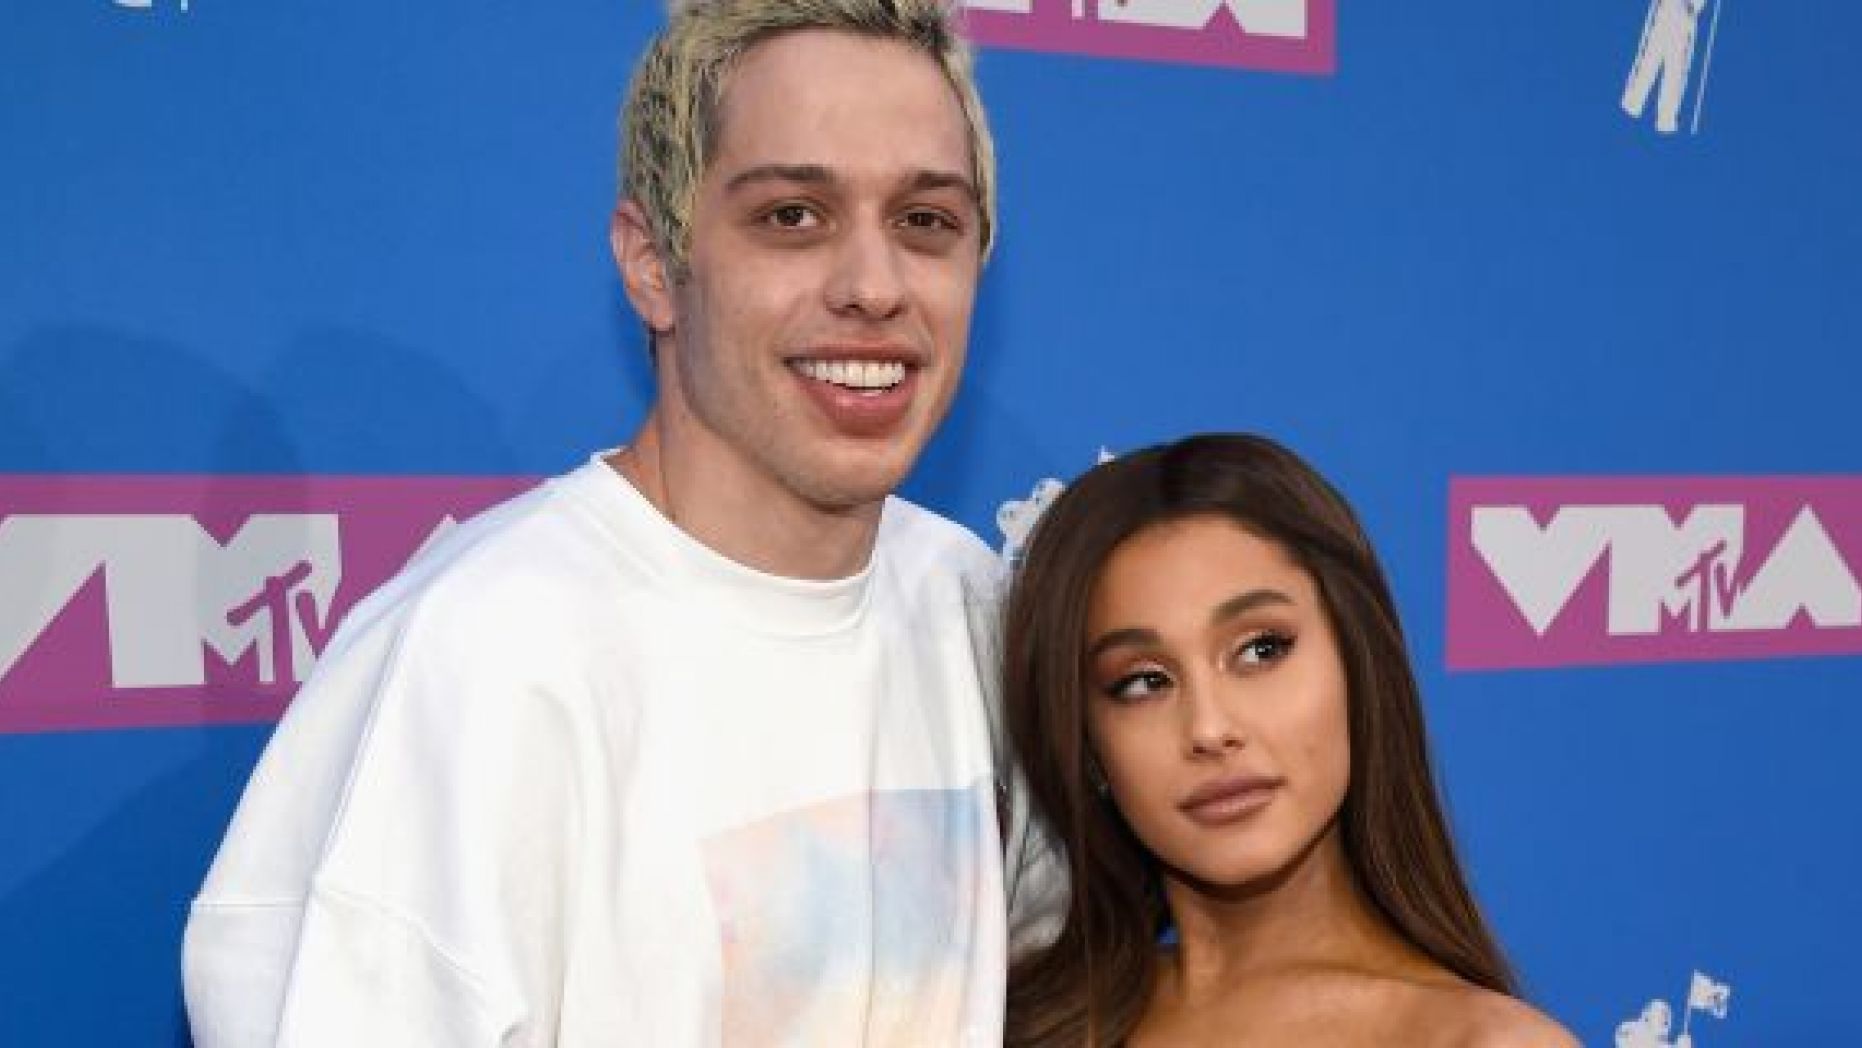 Pete Davidson Jokes About Breakup With Ariana Grande at Comedy Show